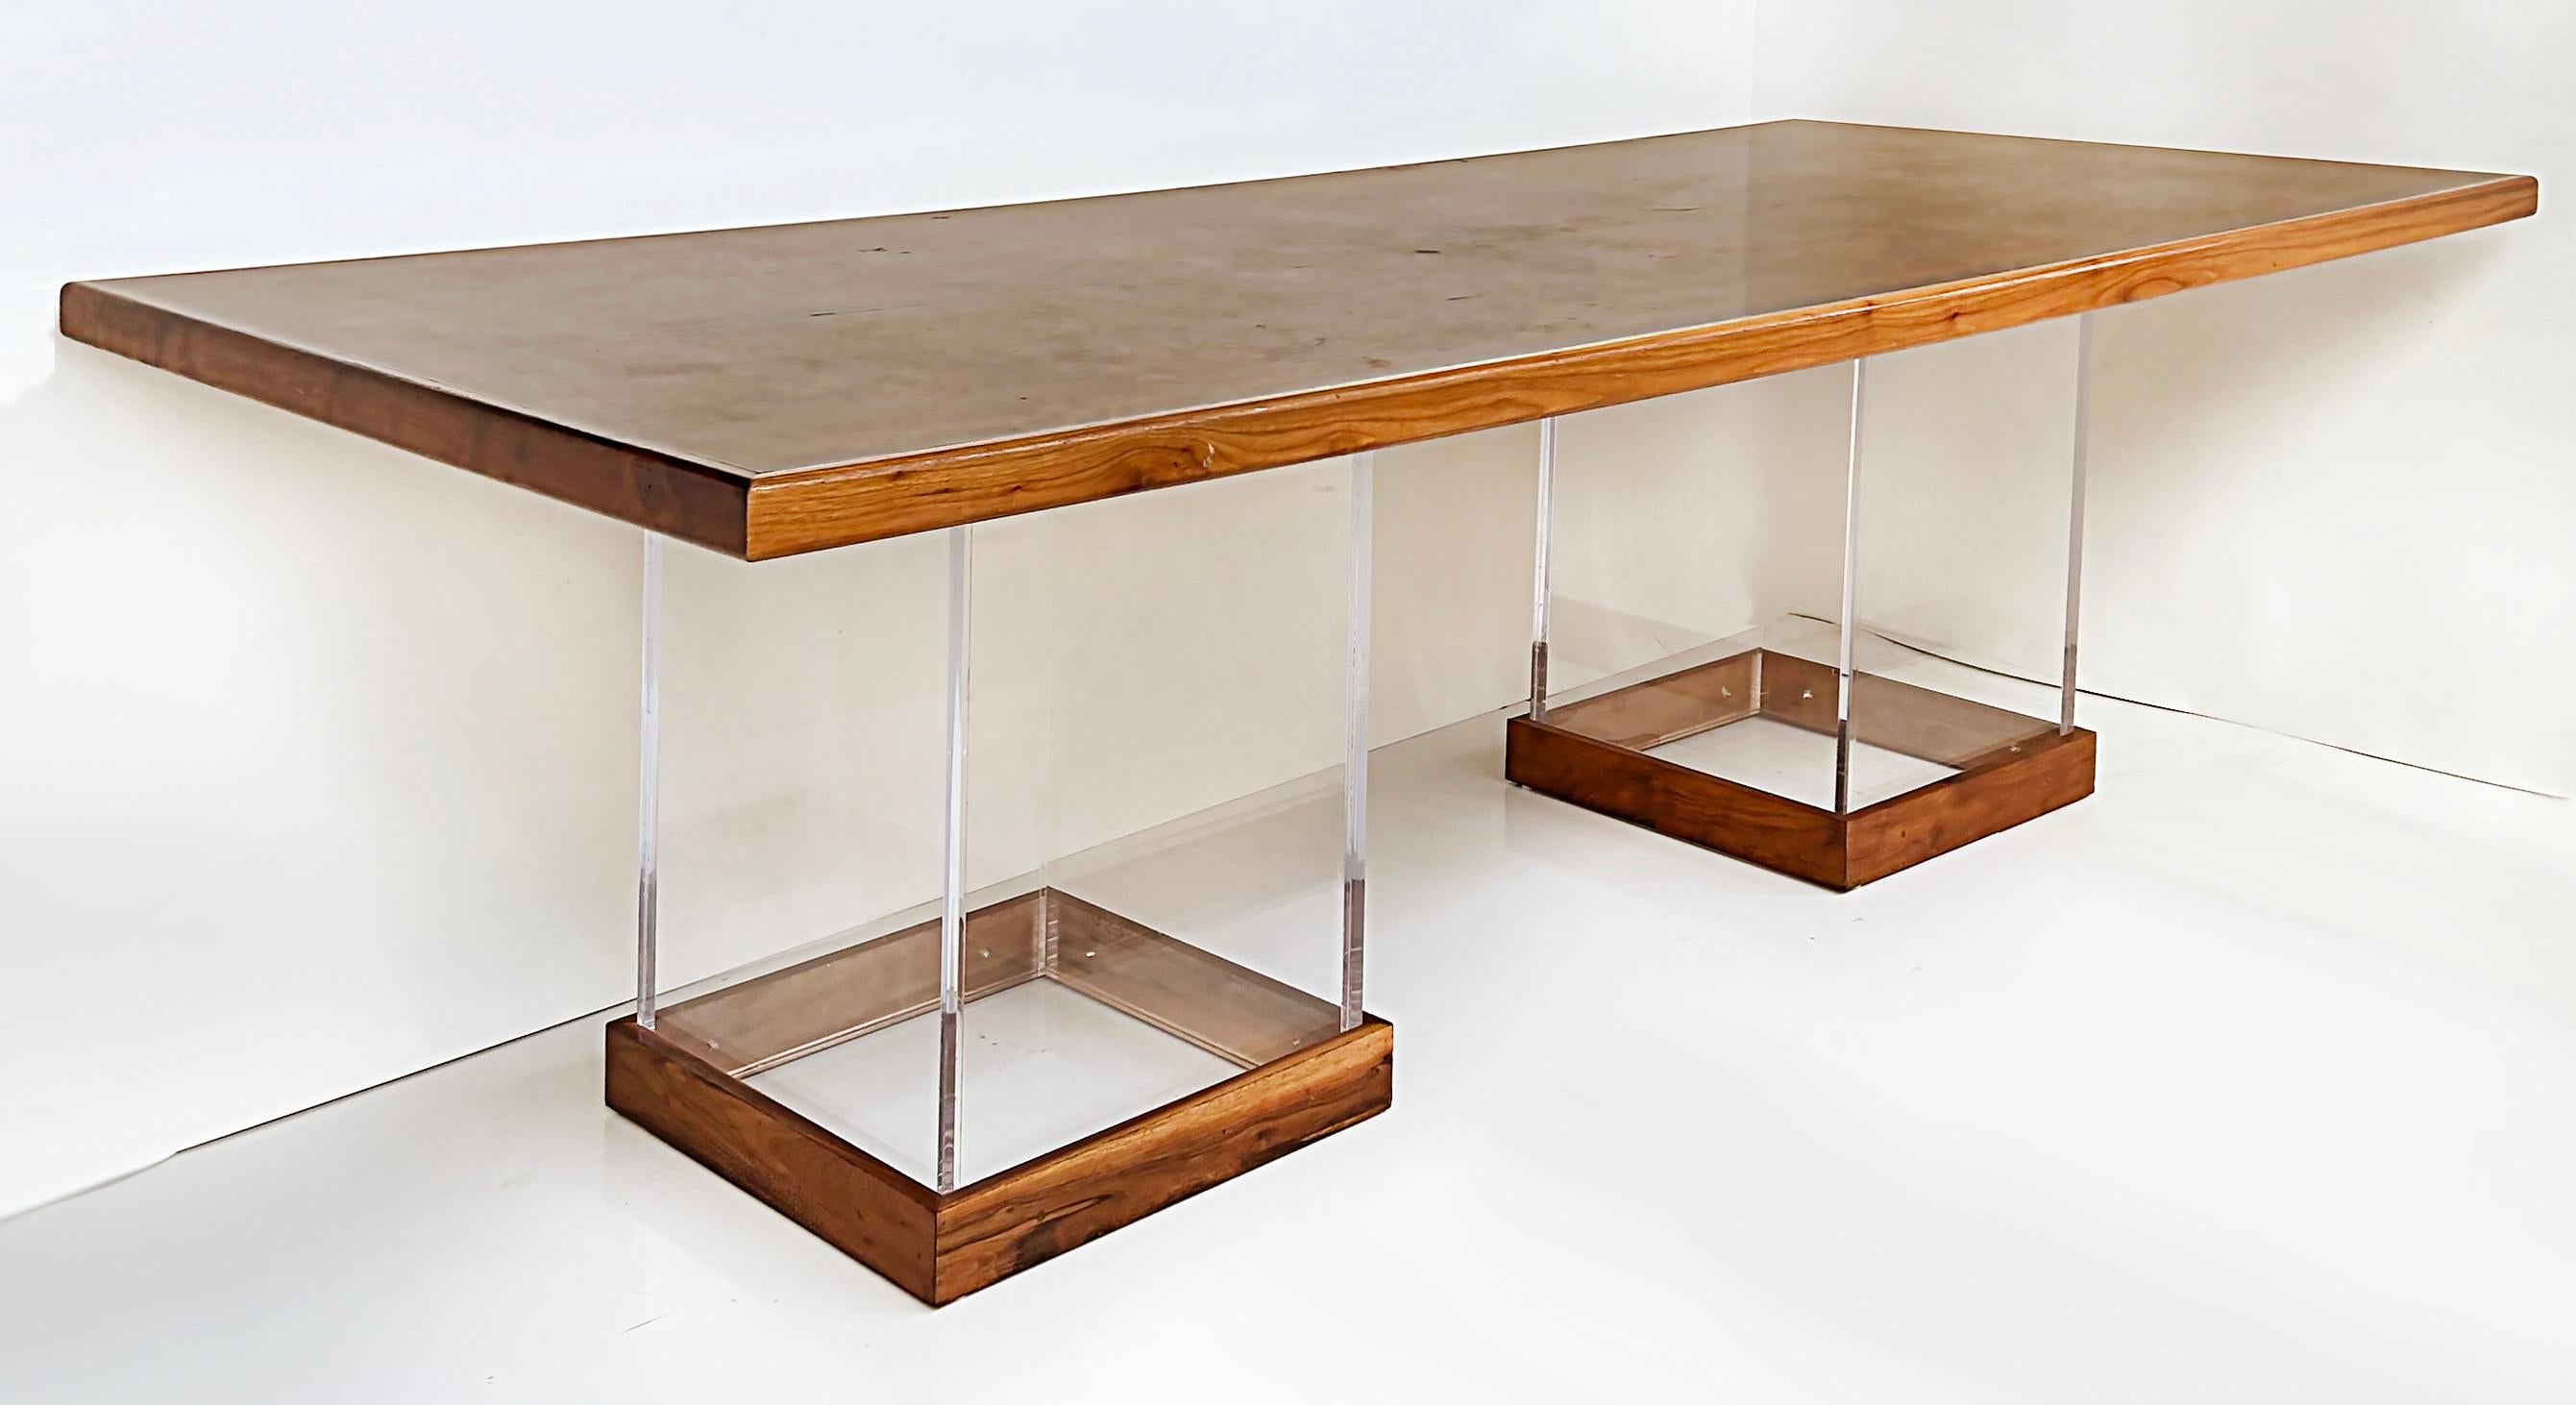 20th Century Burlwood Matched Grain Dining Table with Lucite Pedestal Bases